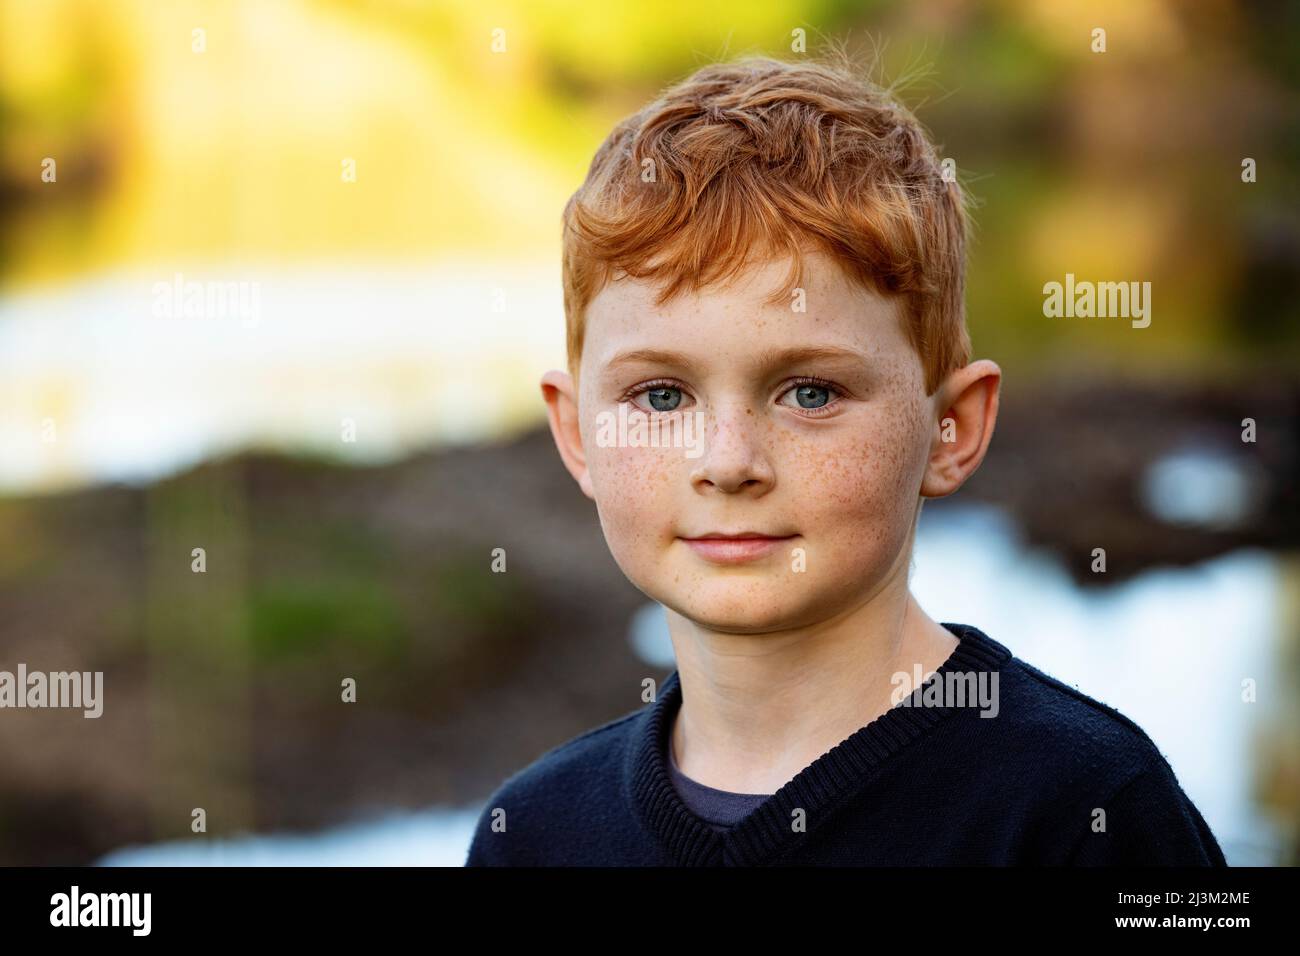 Outdoor portrait of boy with red hair and freckles and blurred autumn colours in the background; Edmonton, Alberta, Canada Stock Photo